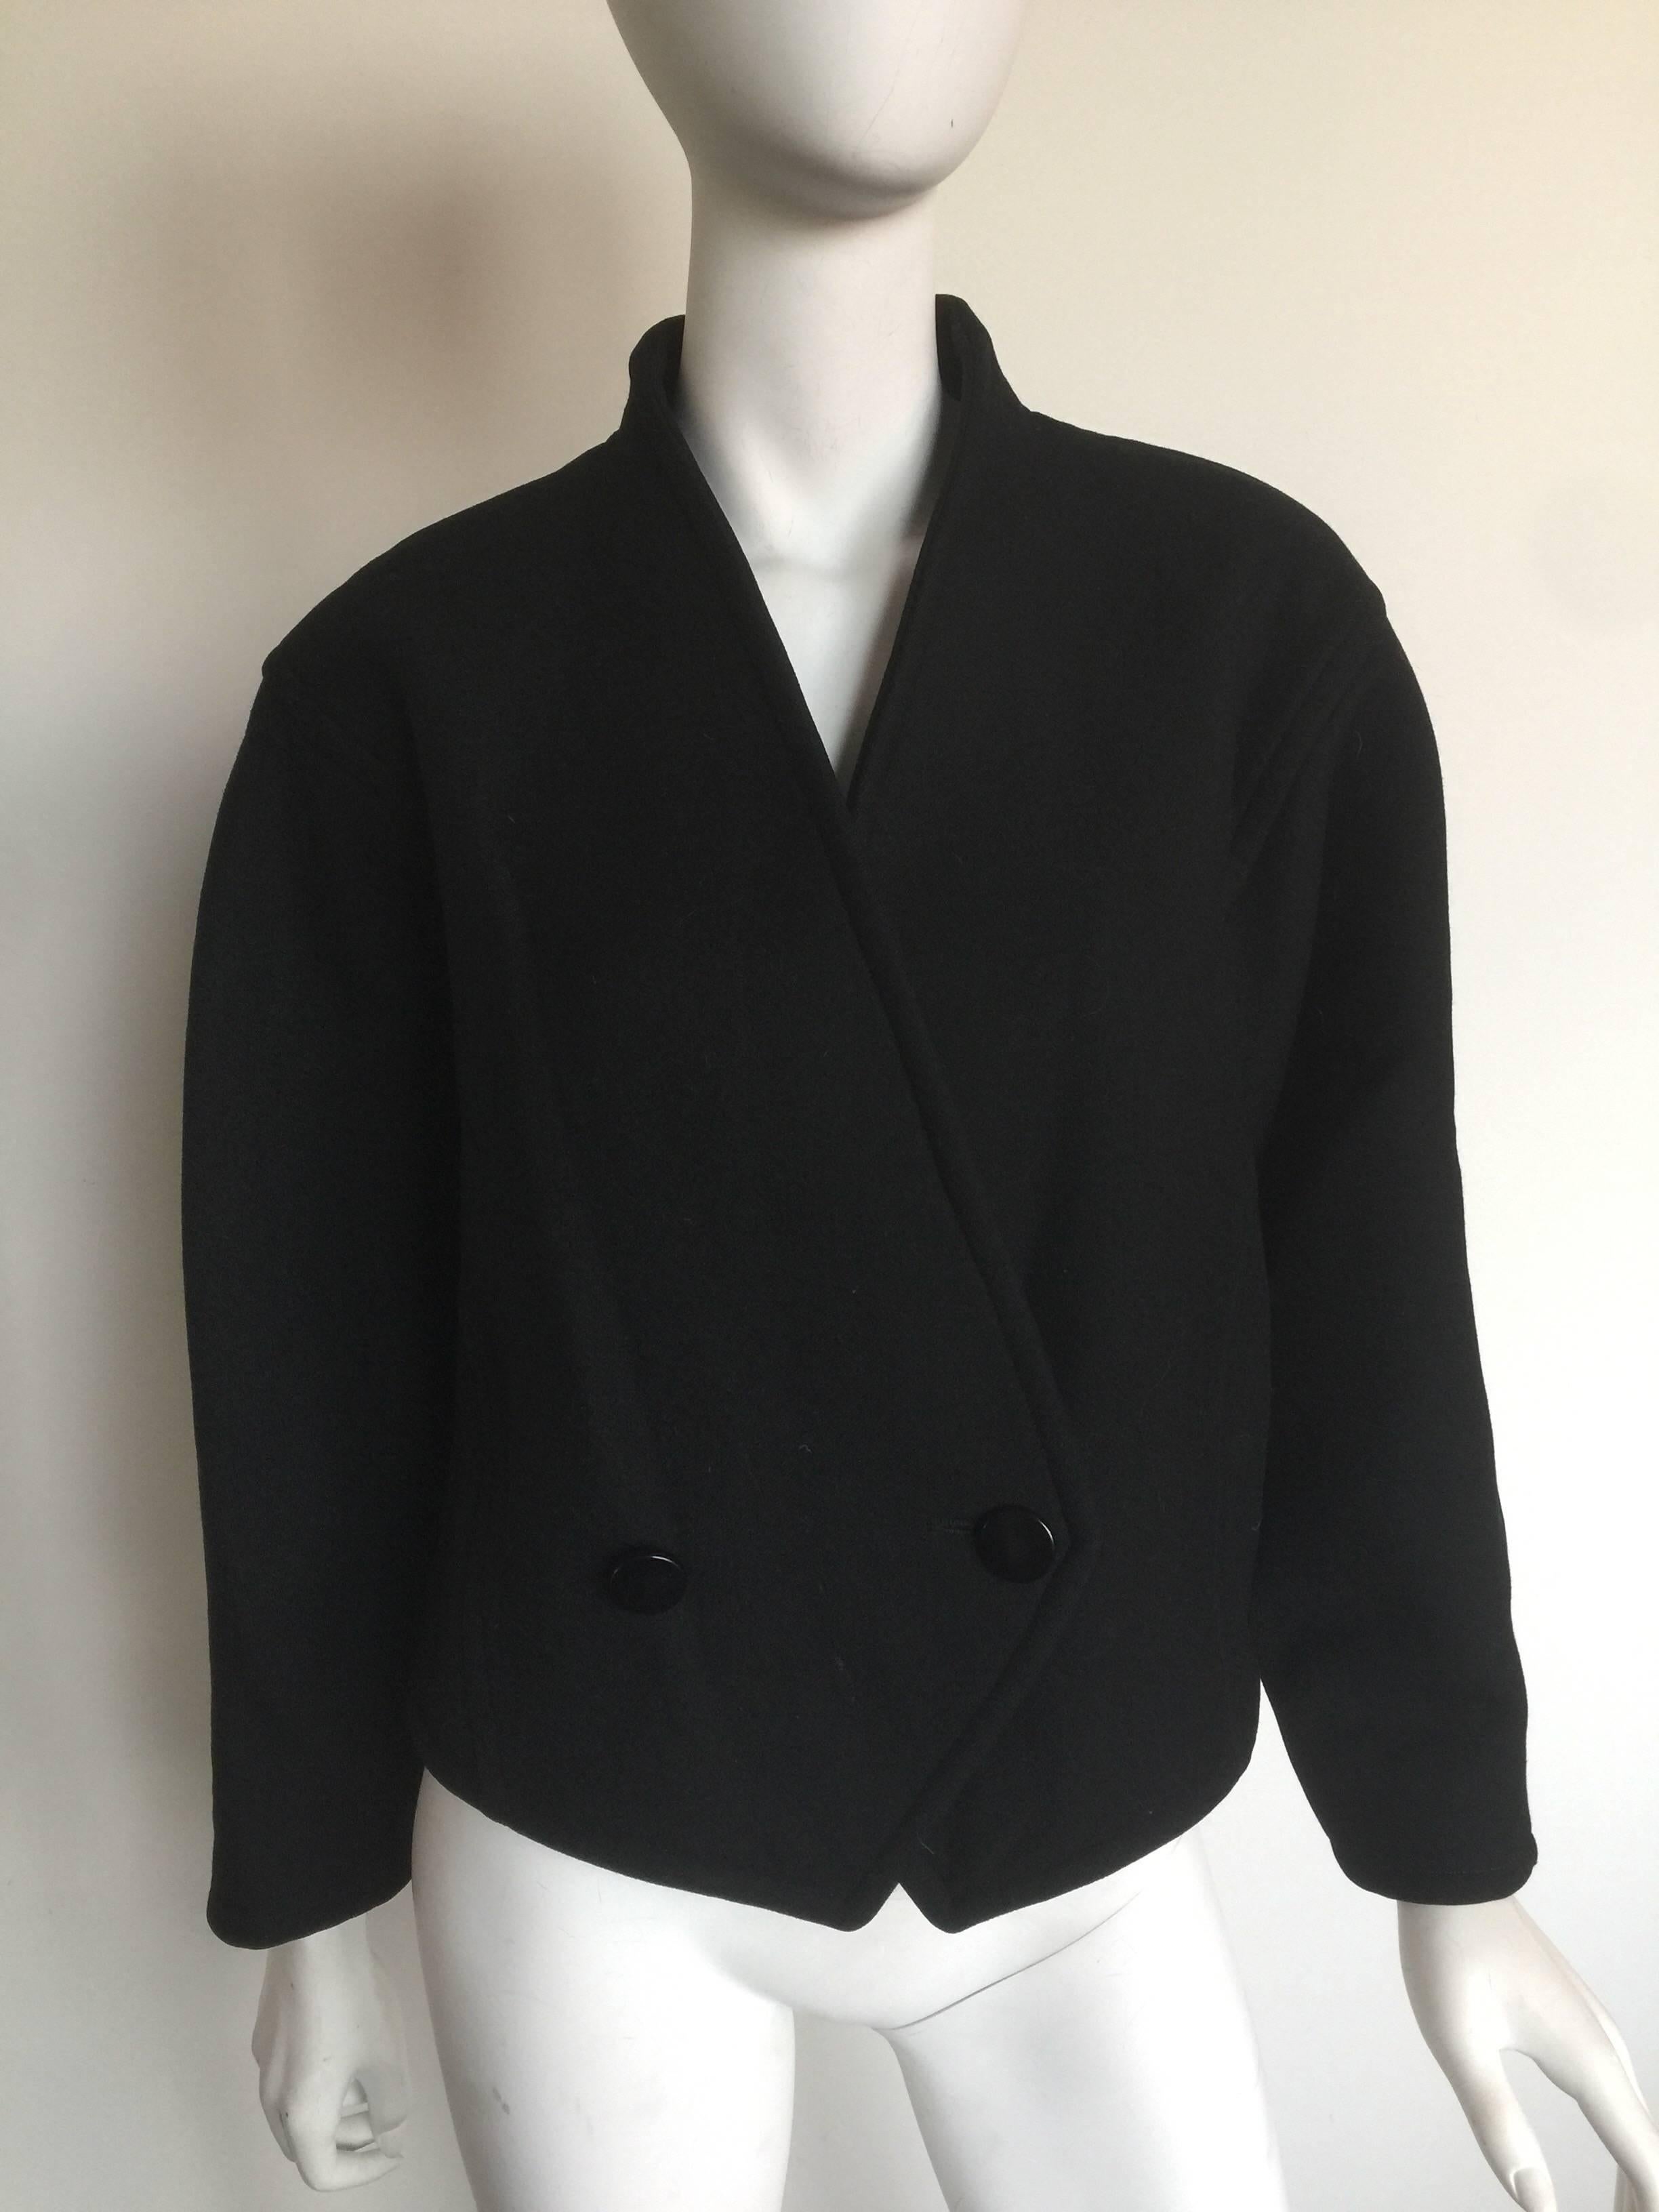 This cropped Courreges pea coat from the 1980's boasts a minimalistic structured silhouette, making it the ideal finisher for most ensembles.  It has two large round buttons for a double-breasted look and can be worn open or closed. The coat is